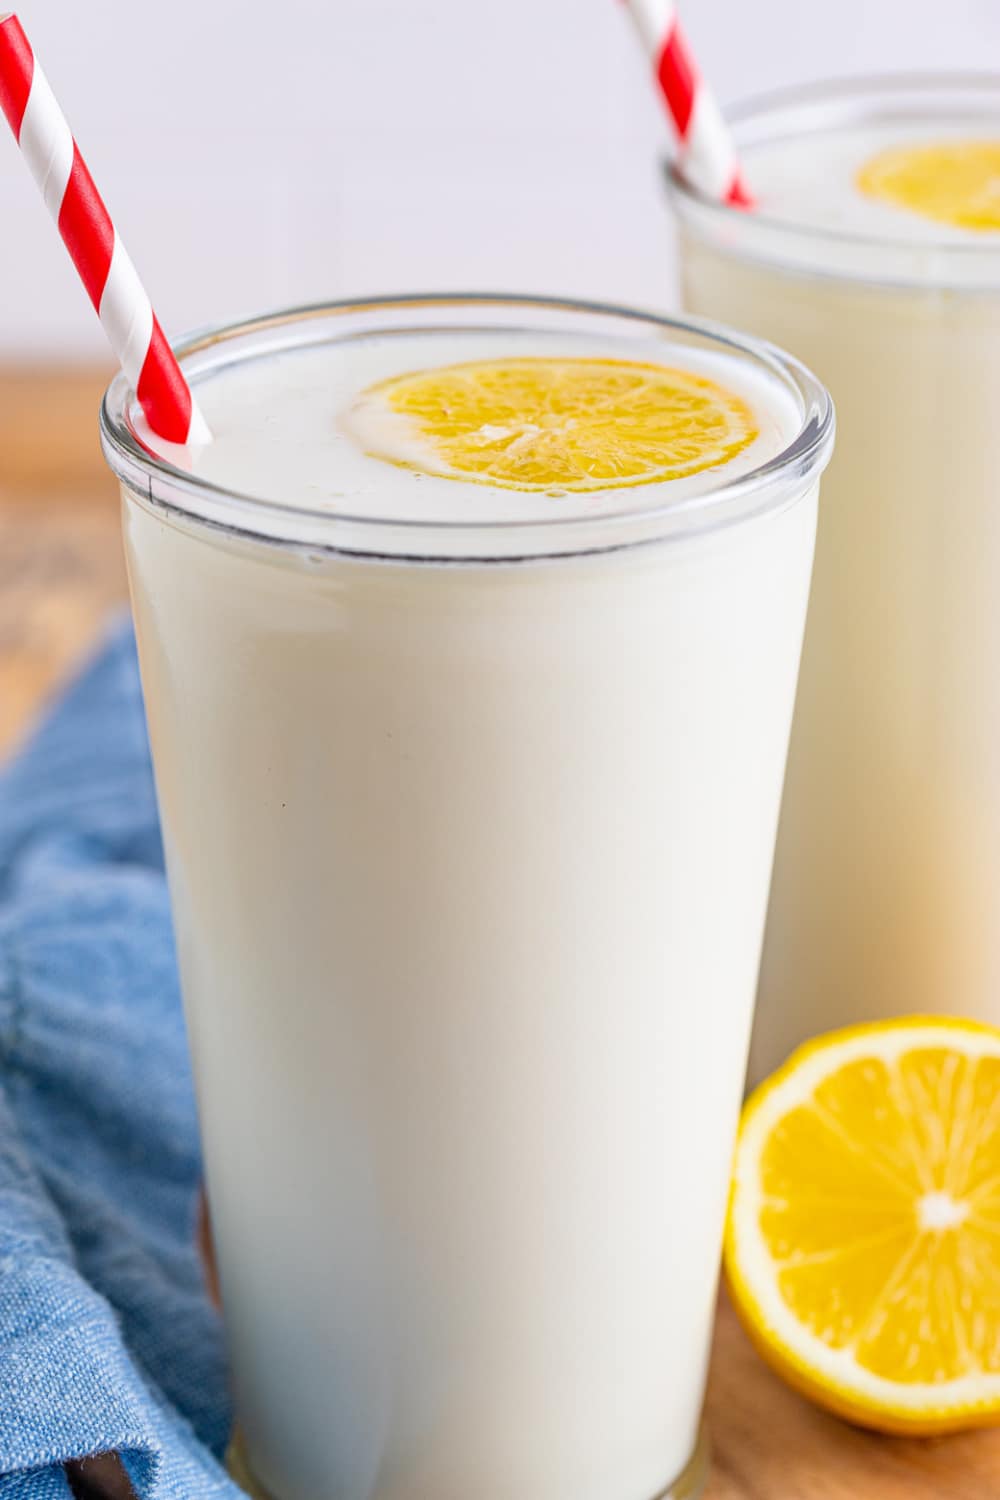 A glass of Frosted Lemonade with a red and white stripe straw.